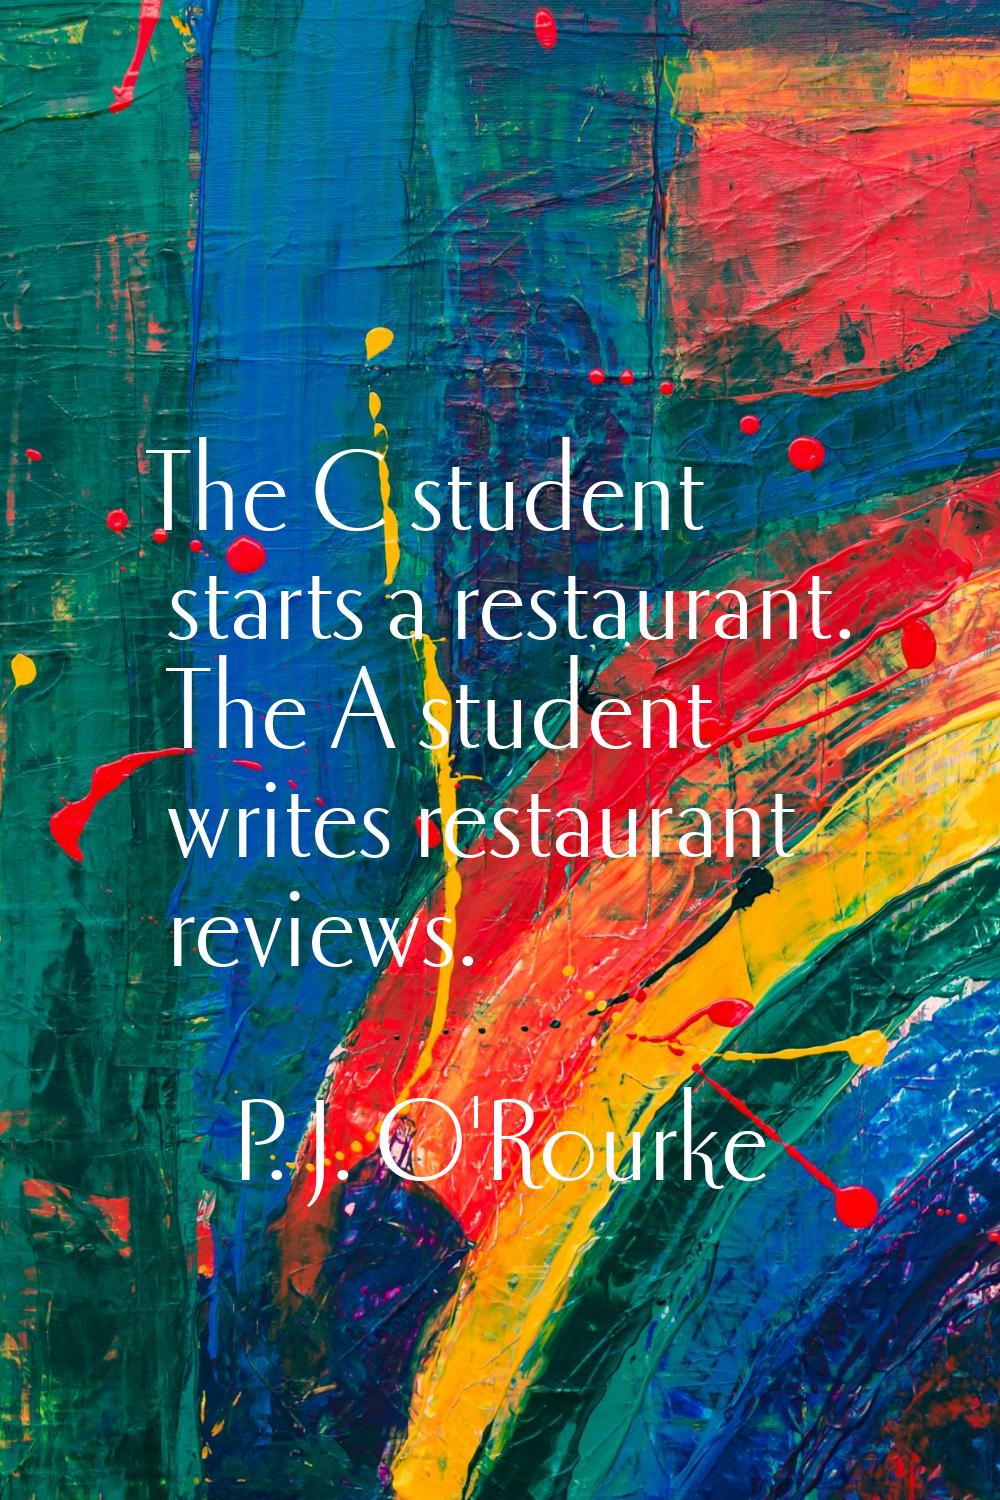 The C student starts a restaurant. The A student writes restaurant reviews.